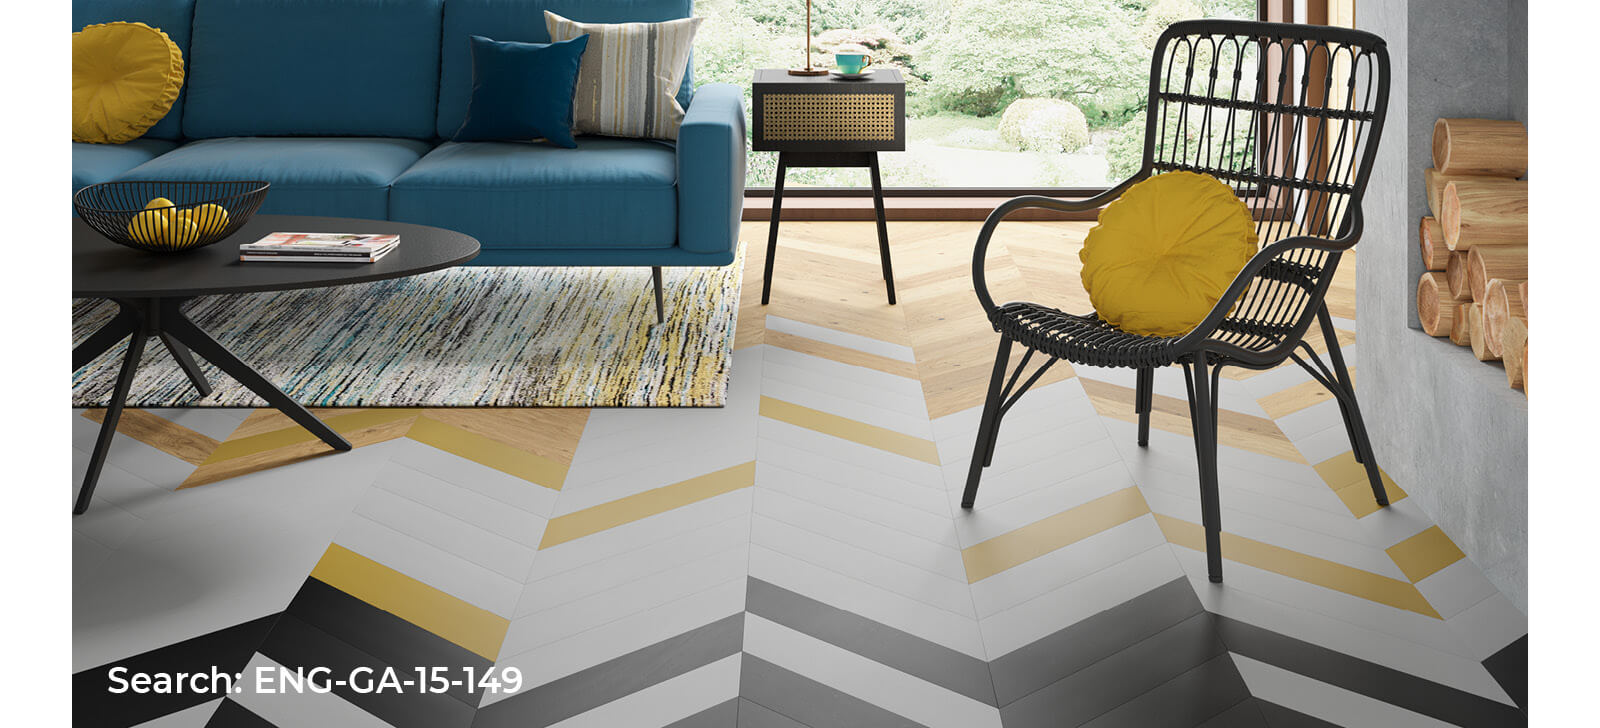 Living room with decorative painted chevron real wood floor